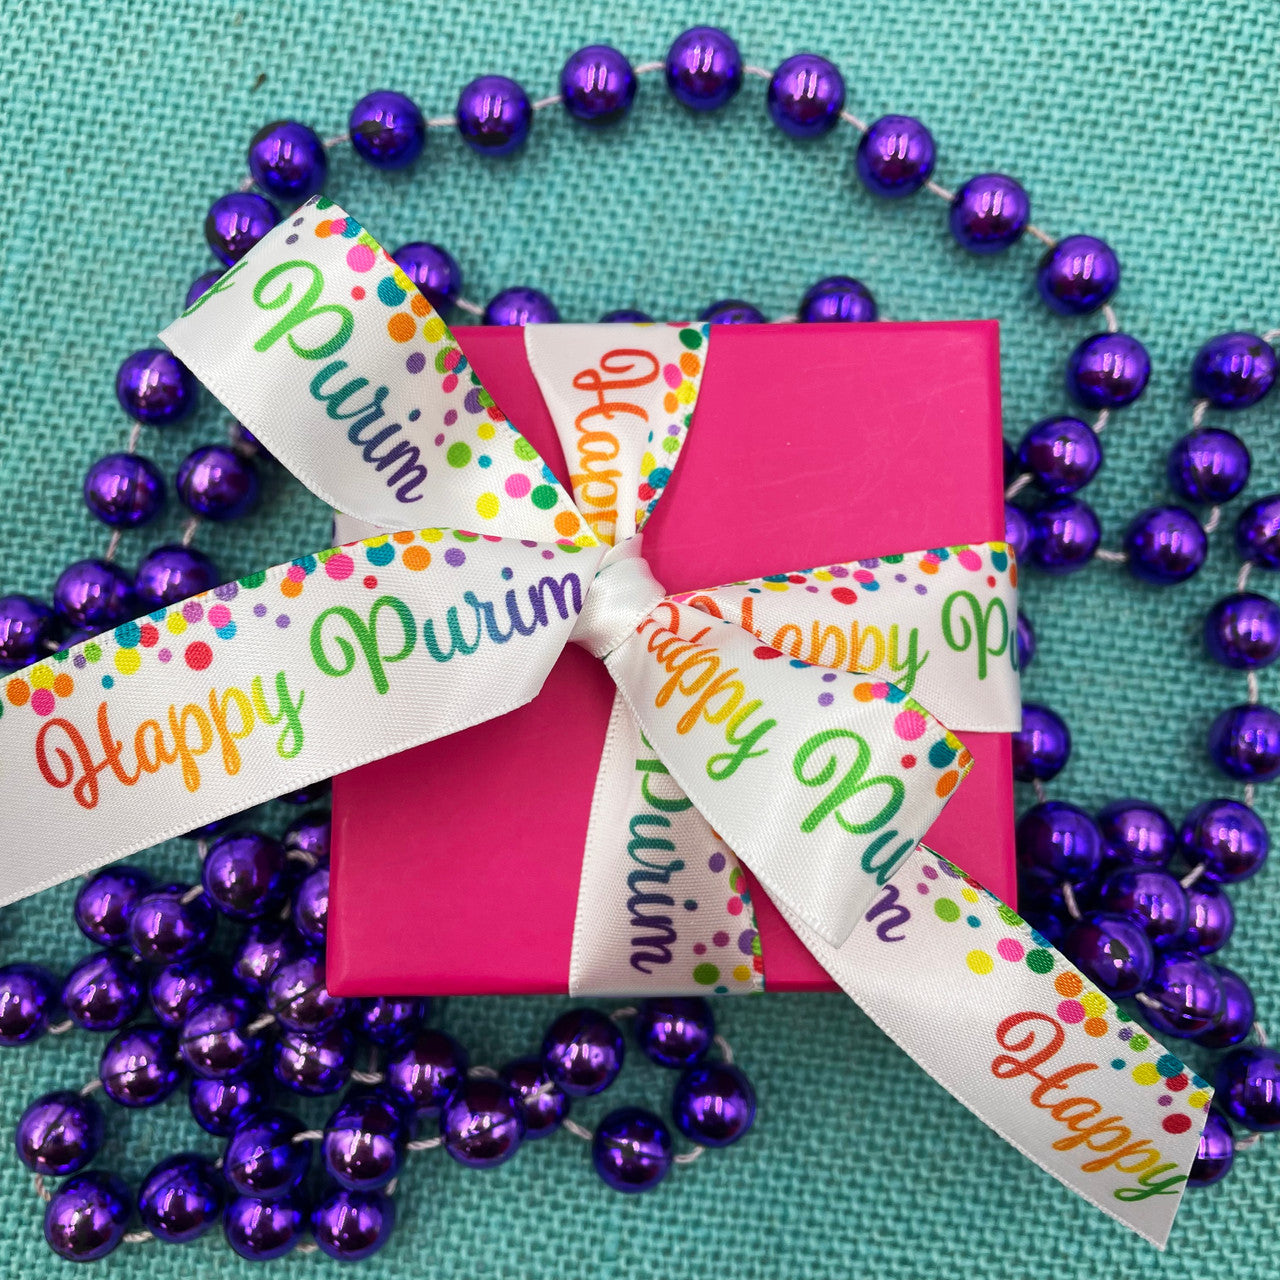 Tie a small gift with our Happy Purim ribbon for a fun Purim surprise! 